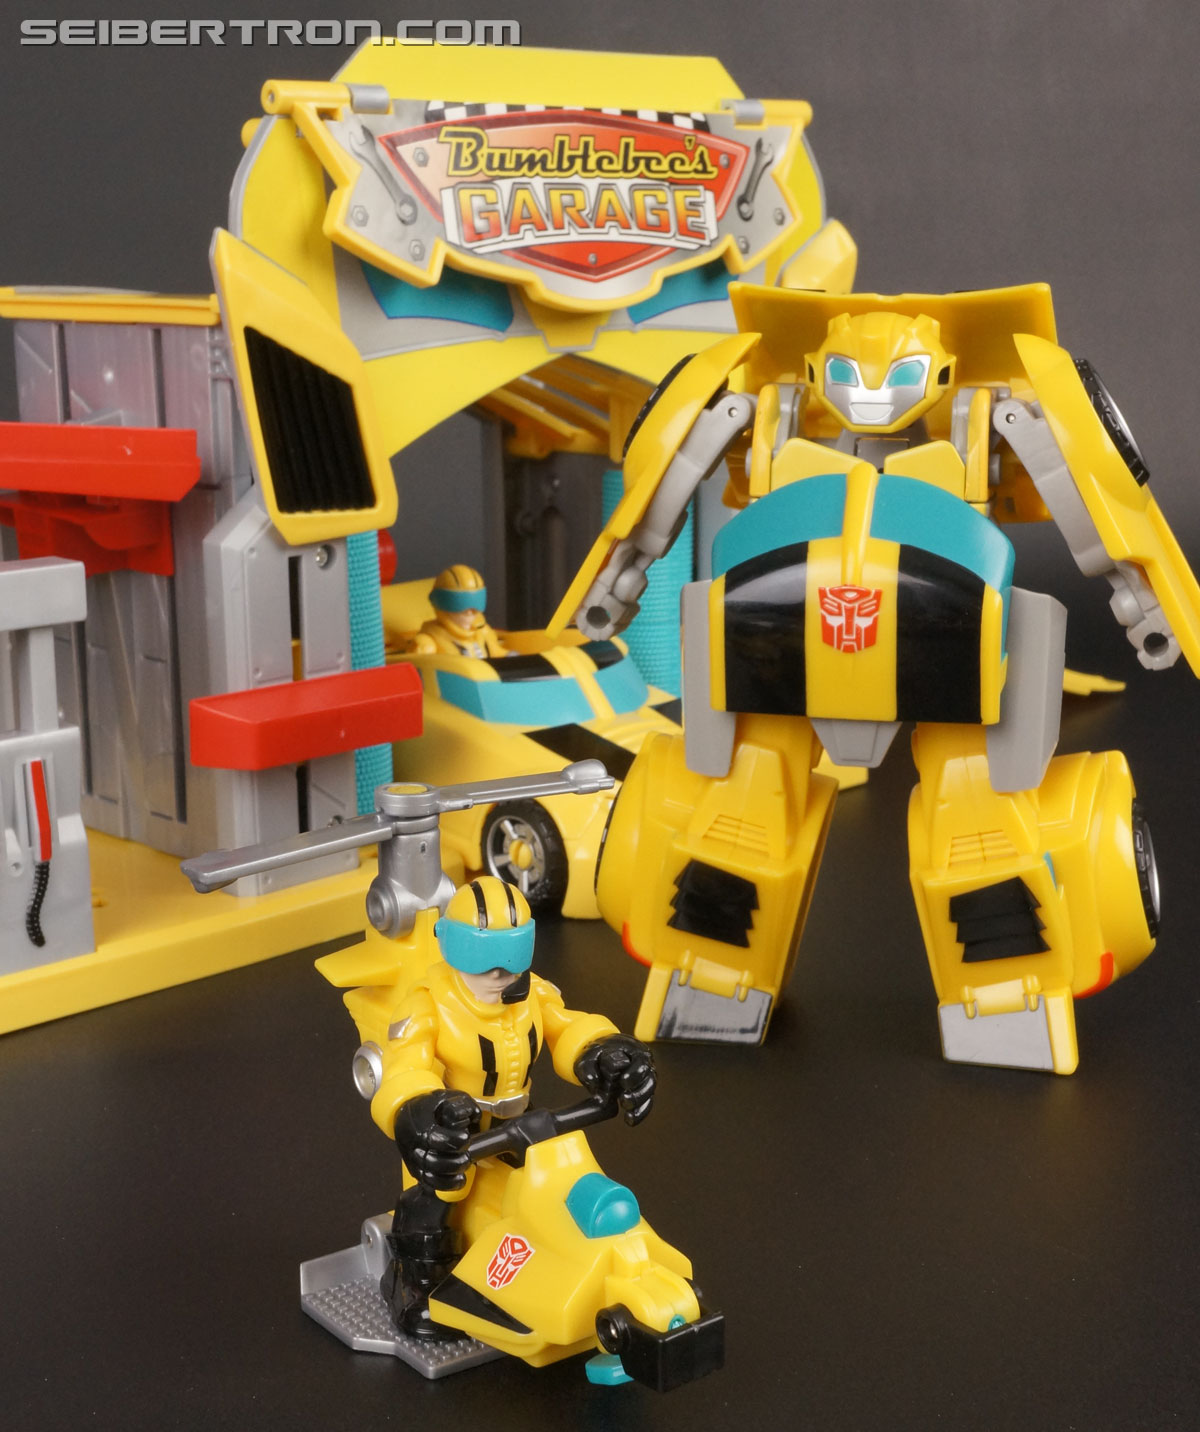 Transformers Rescue Bots Bumblebee Rescue Garage (Image #80 of 80)